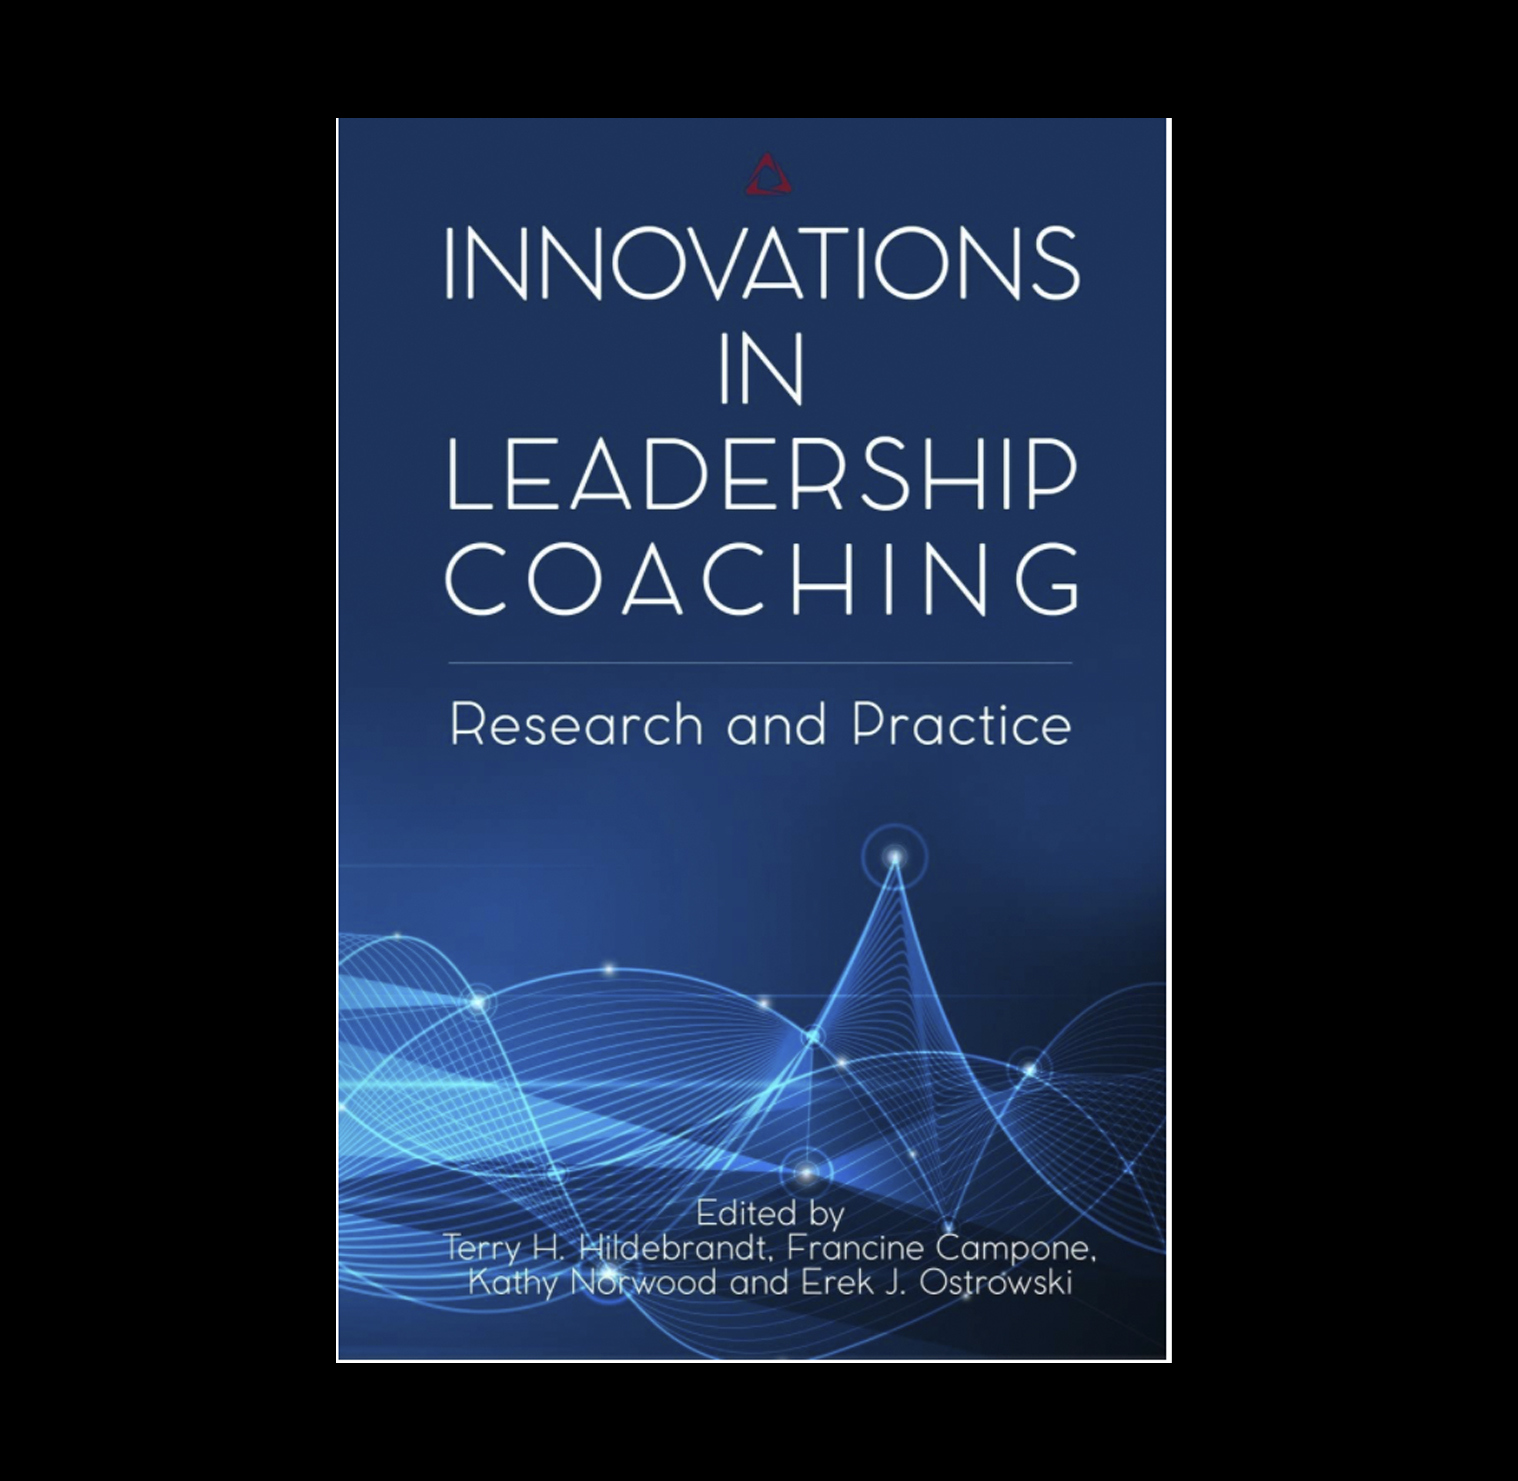 Innovations in Leadership Coaching